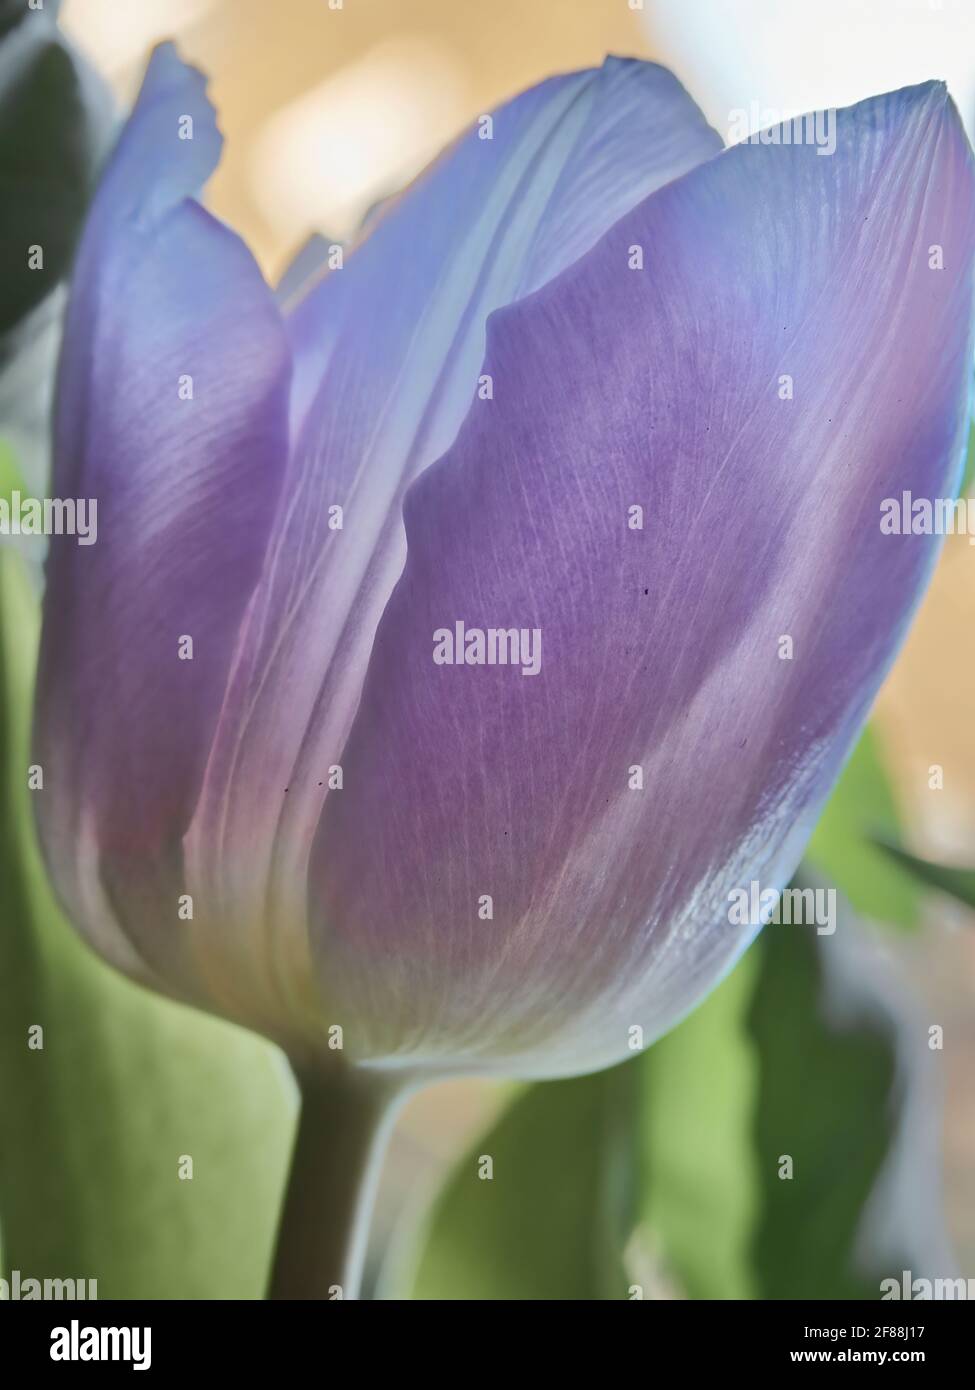 A light purple tulip flower head in extreme close-up, filling the frame. Sunlight from a nearby window filters through the petals to give a fresh glow Stock Photo